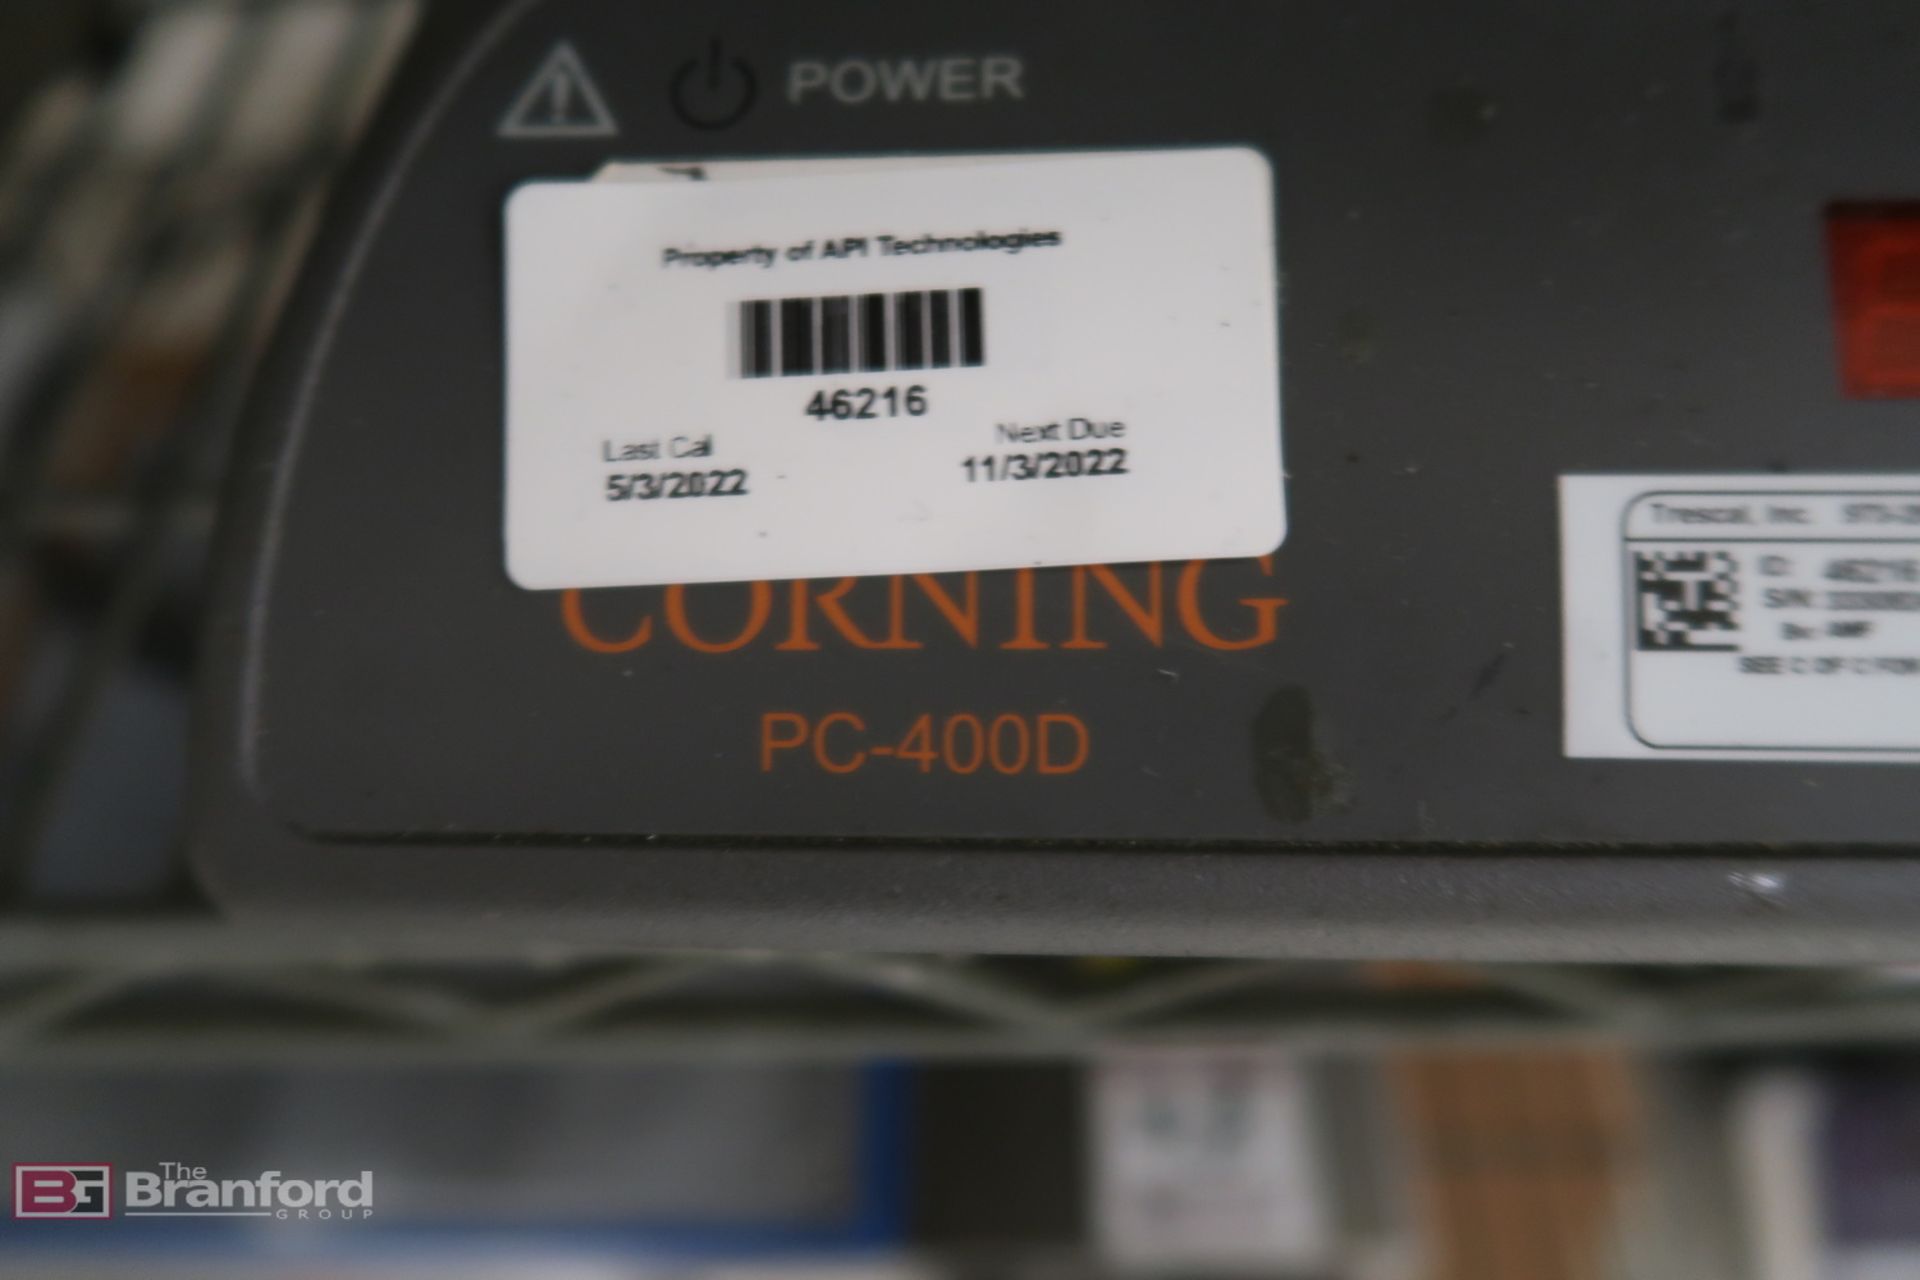 Corning PC-400D hot plate - Image 2 of 2